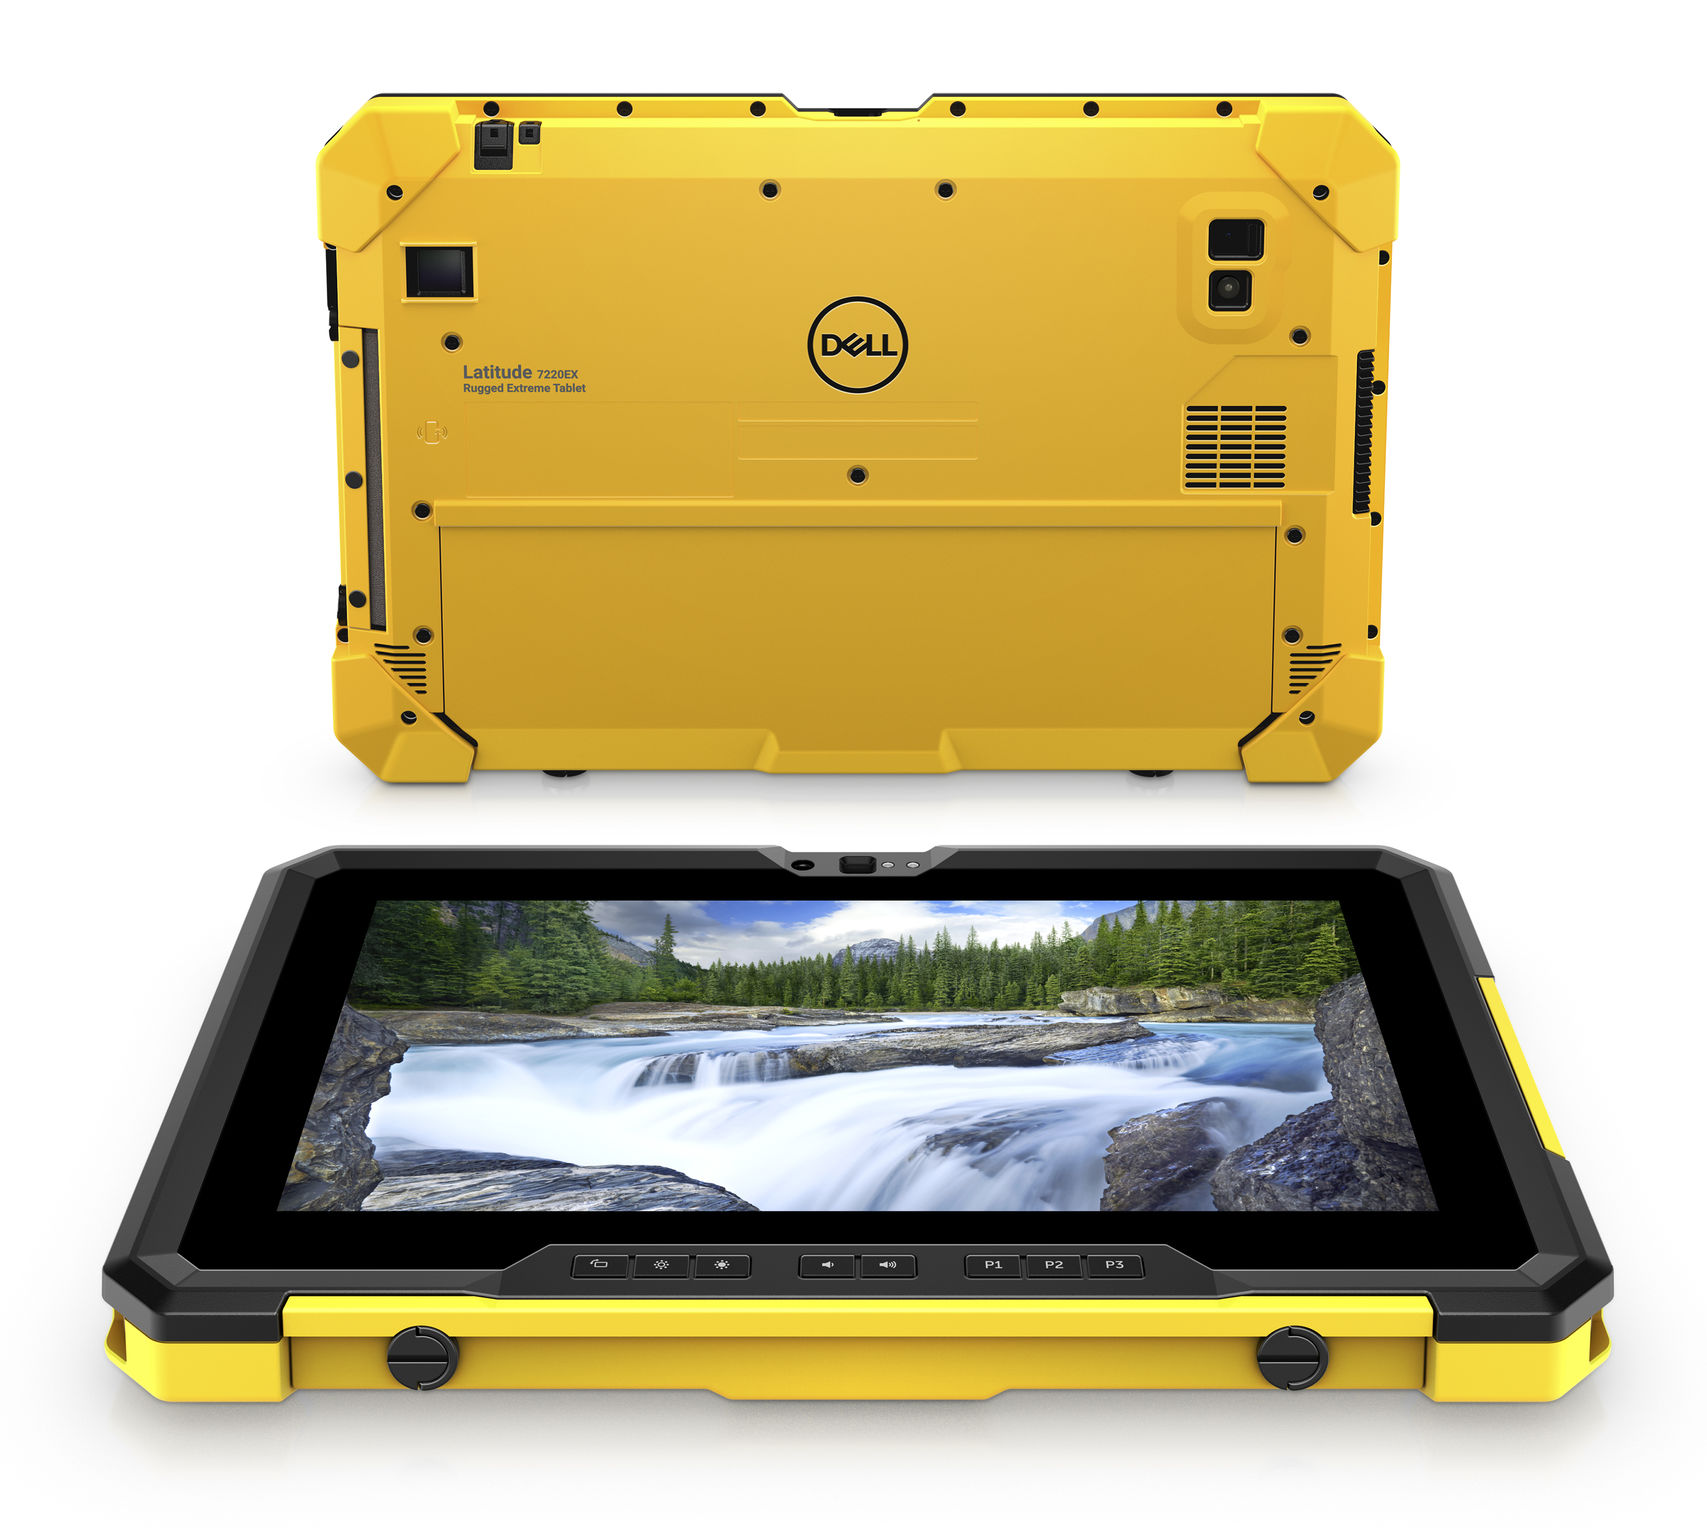 Dell Latitude 7220EX Rugged Extreme Tablet